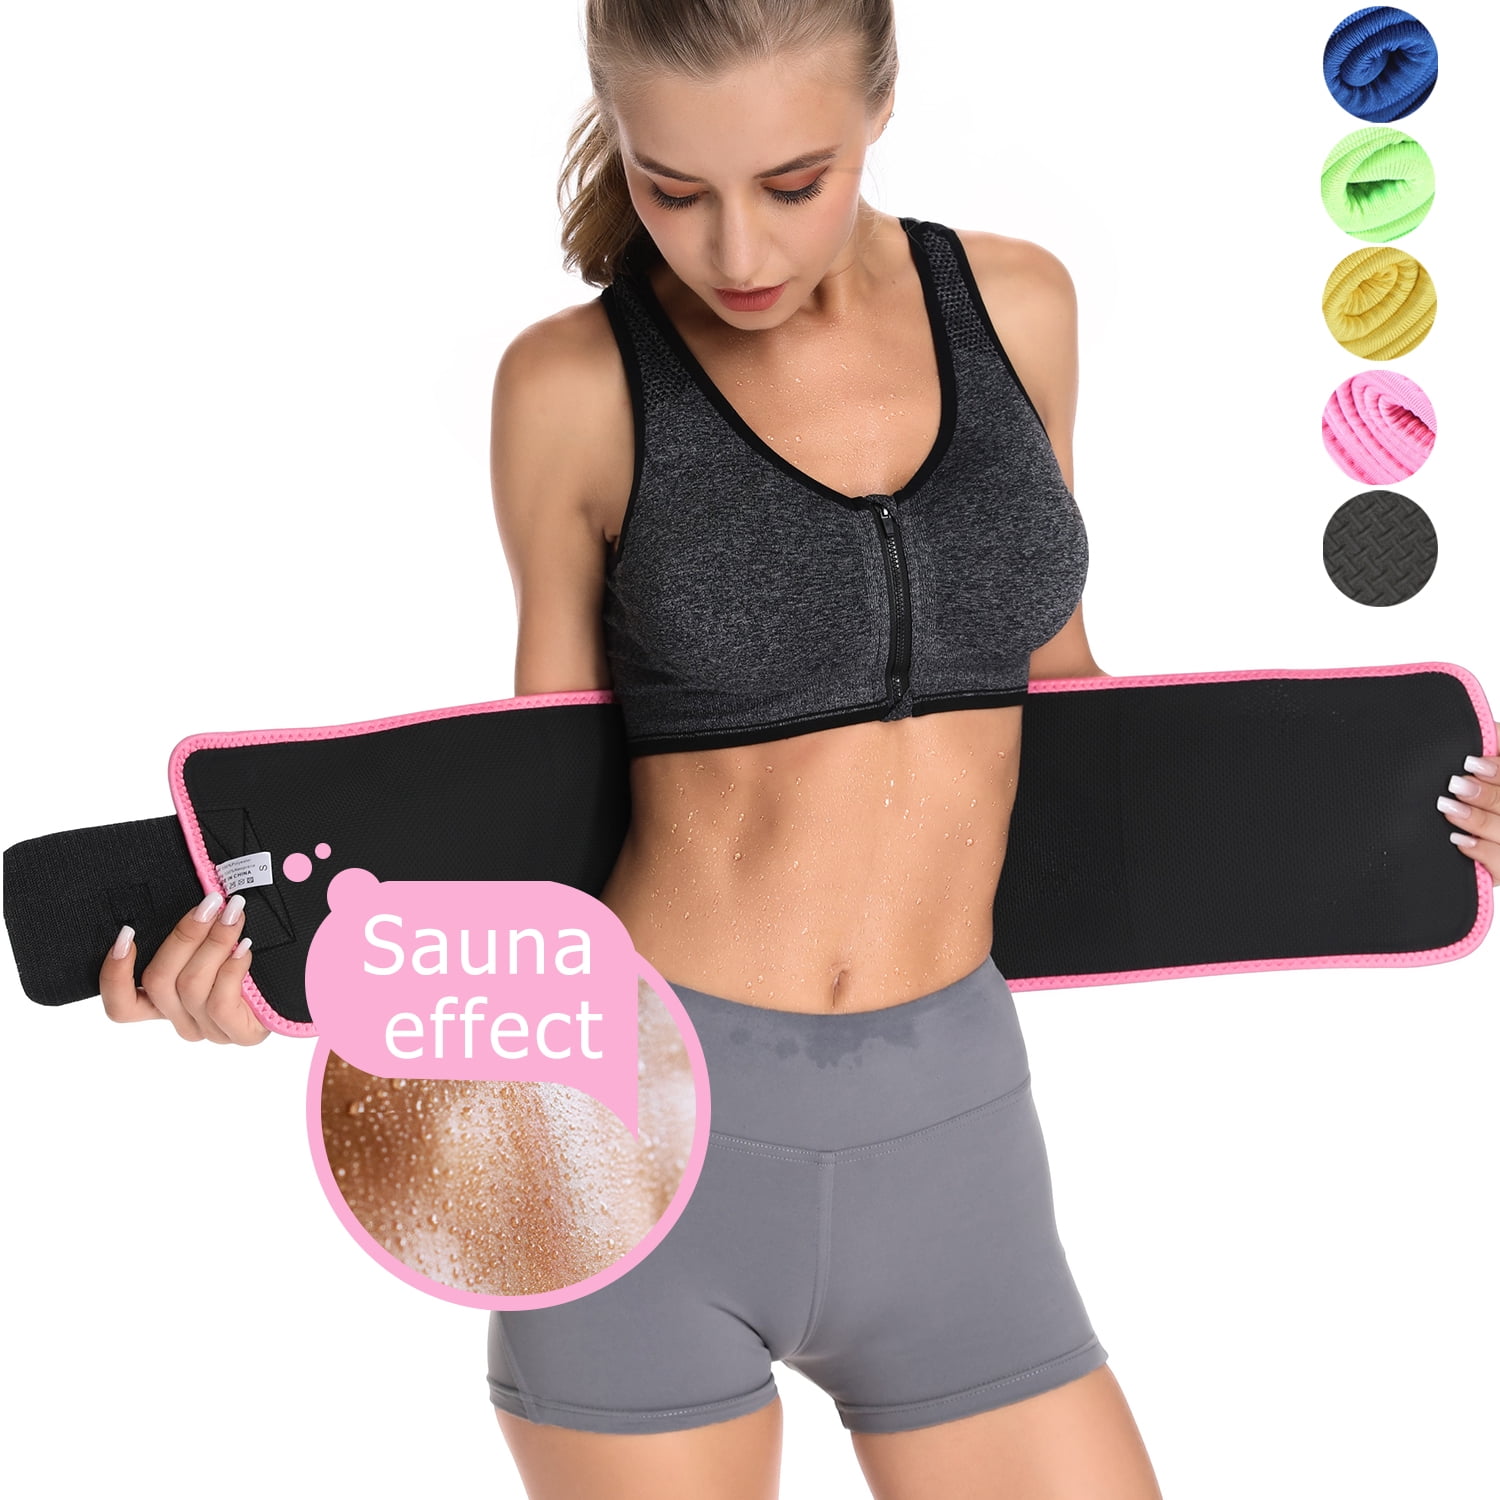 Thermo Sweat Body Shaper Slimming Waist Trainer Cincher Yoga Gym Top Vest Hot UK